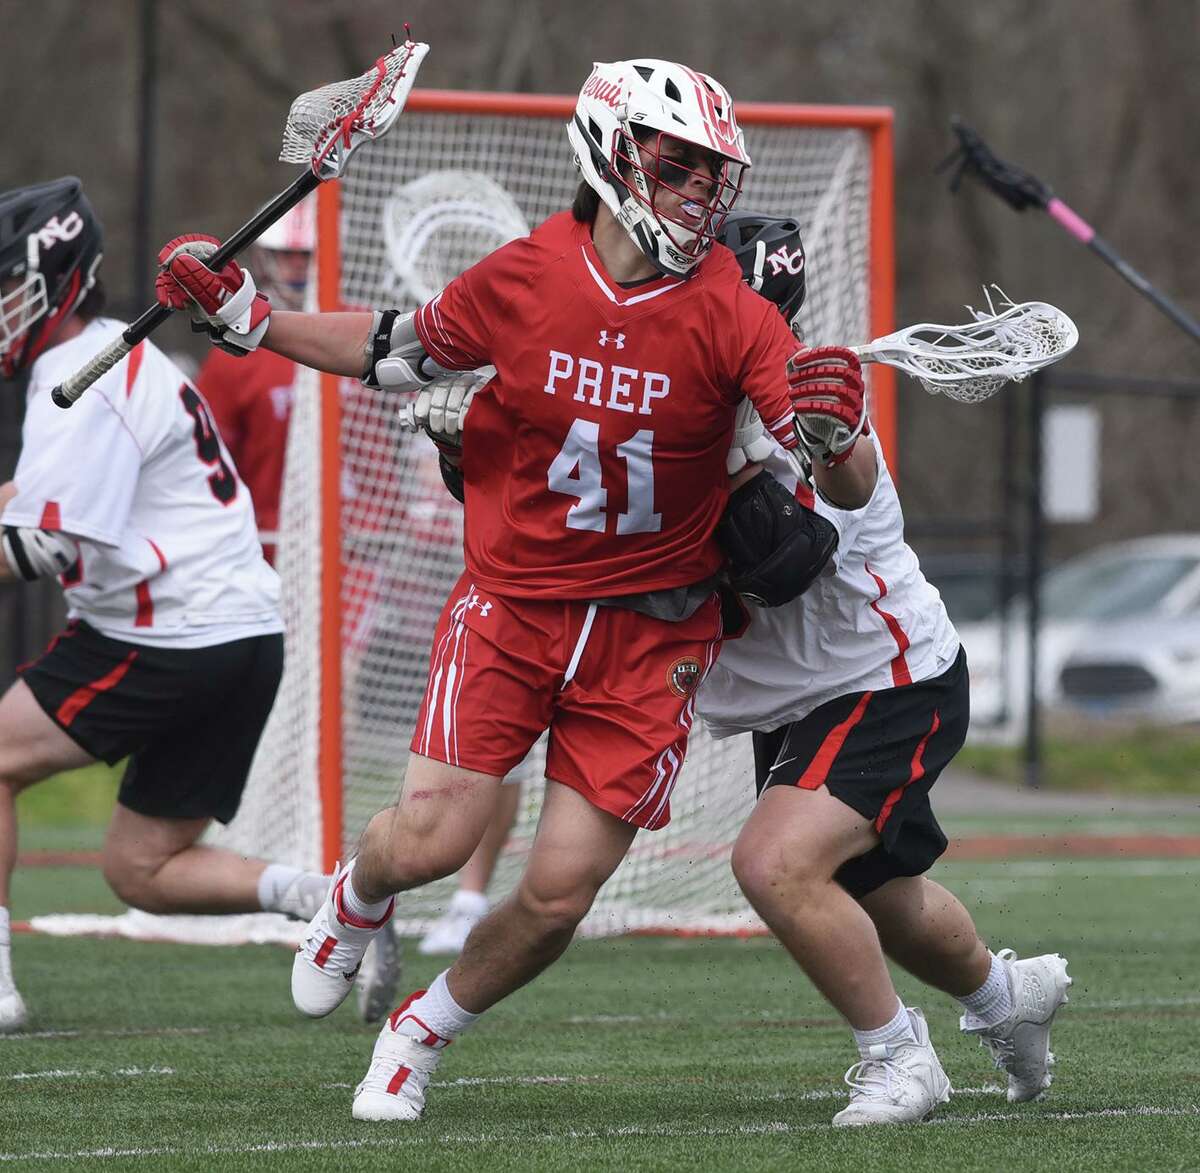 Fairfield Prep’s Peter Grandolfo (41) battles the New Canaan defense during a game in April.